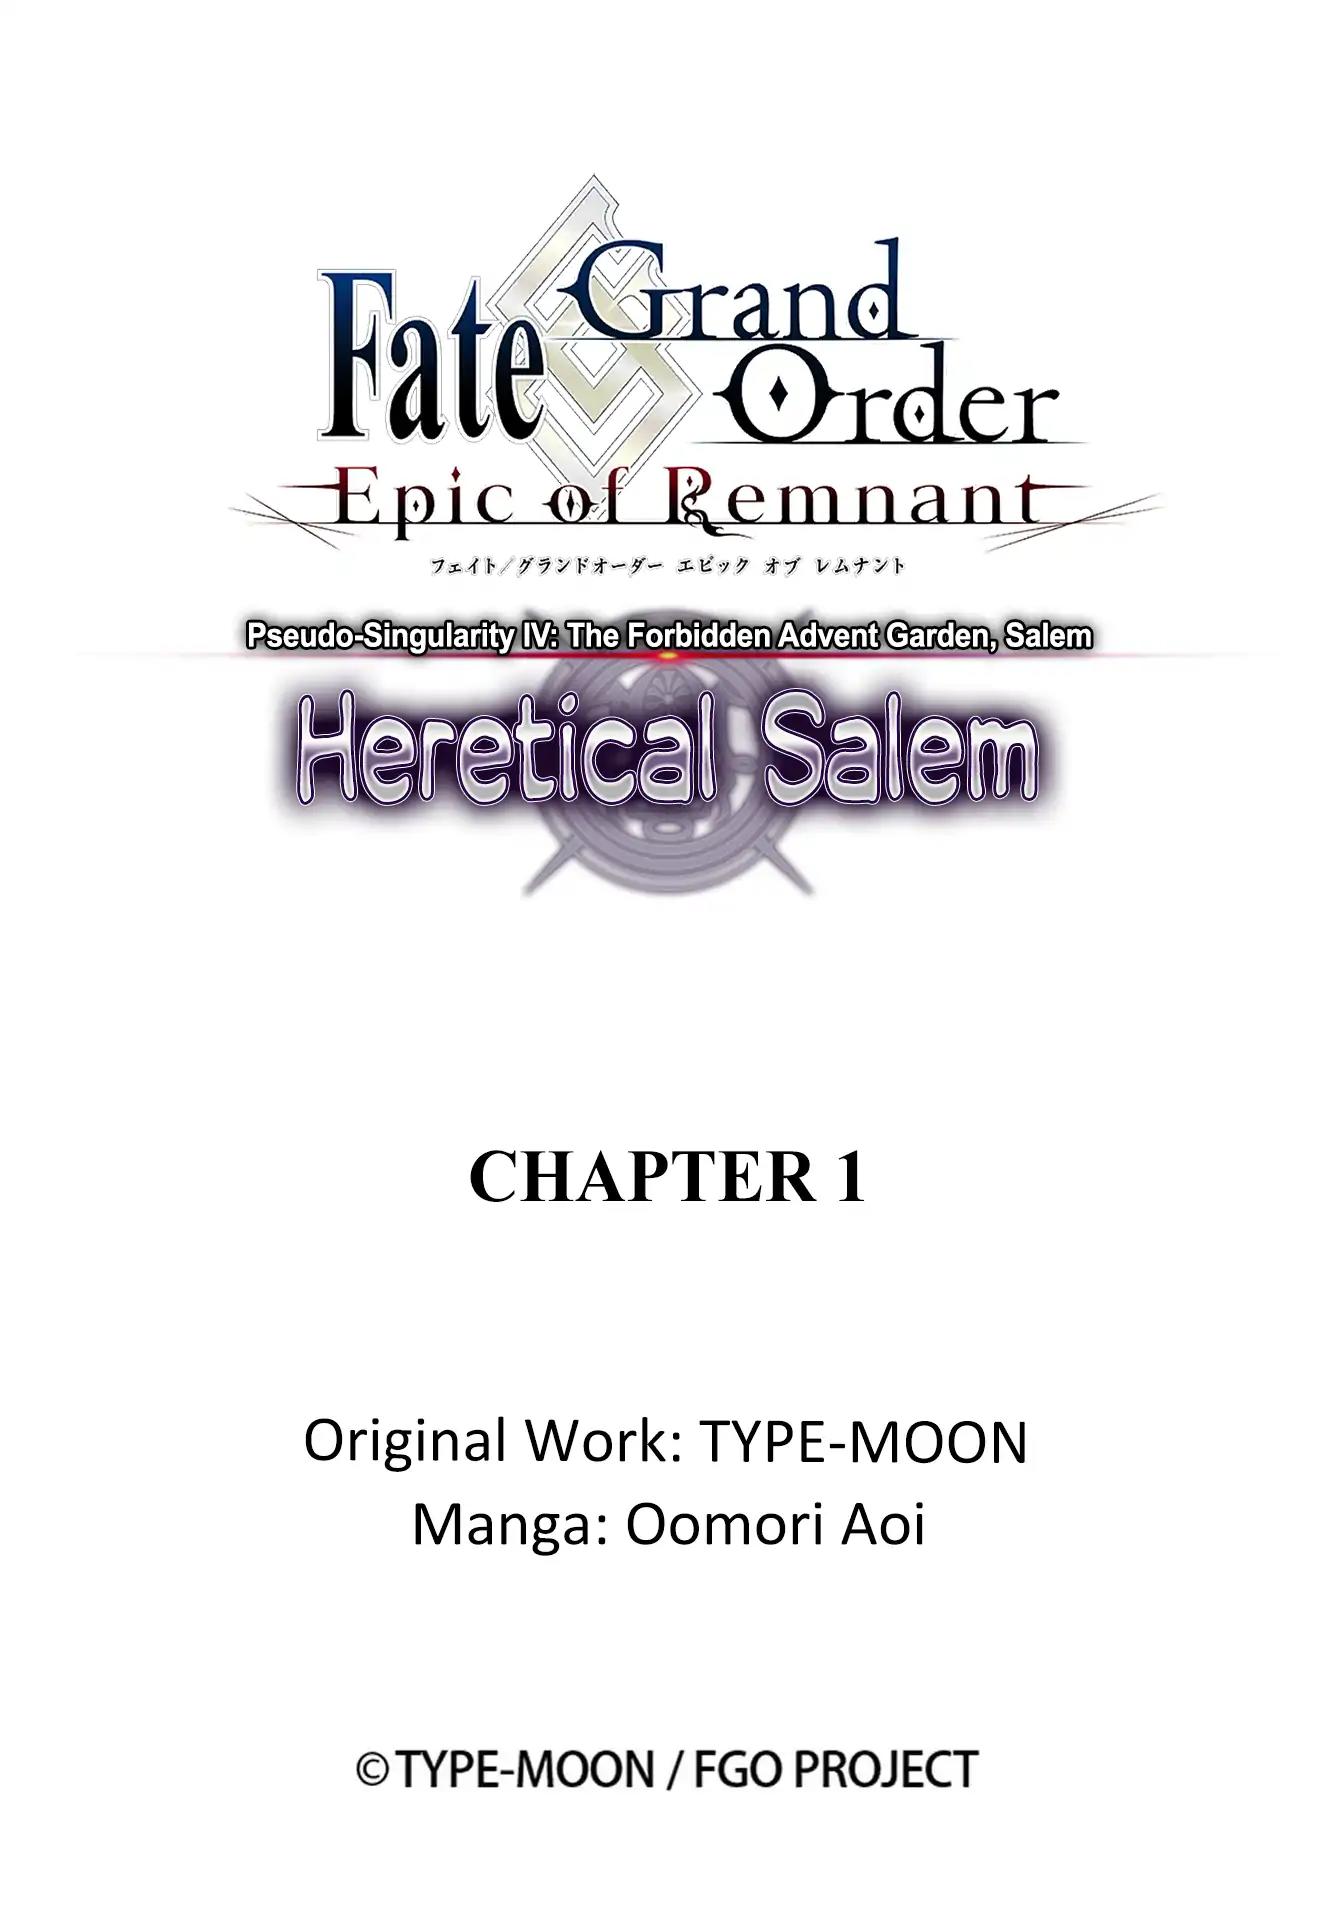 Fate/Grand Order: Epic of Remnant - Subspecies Singularity IV: Taboo Advent Salem: Salem of Heresy Chapter 1: